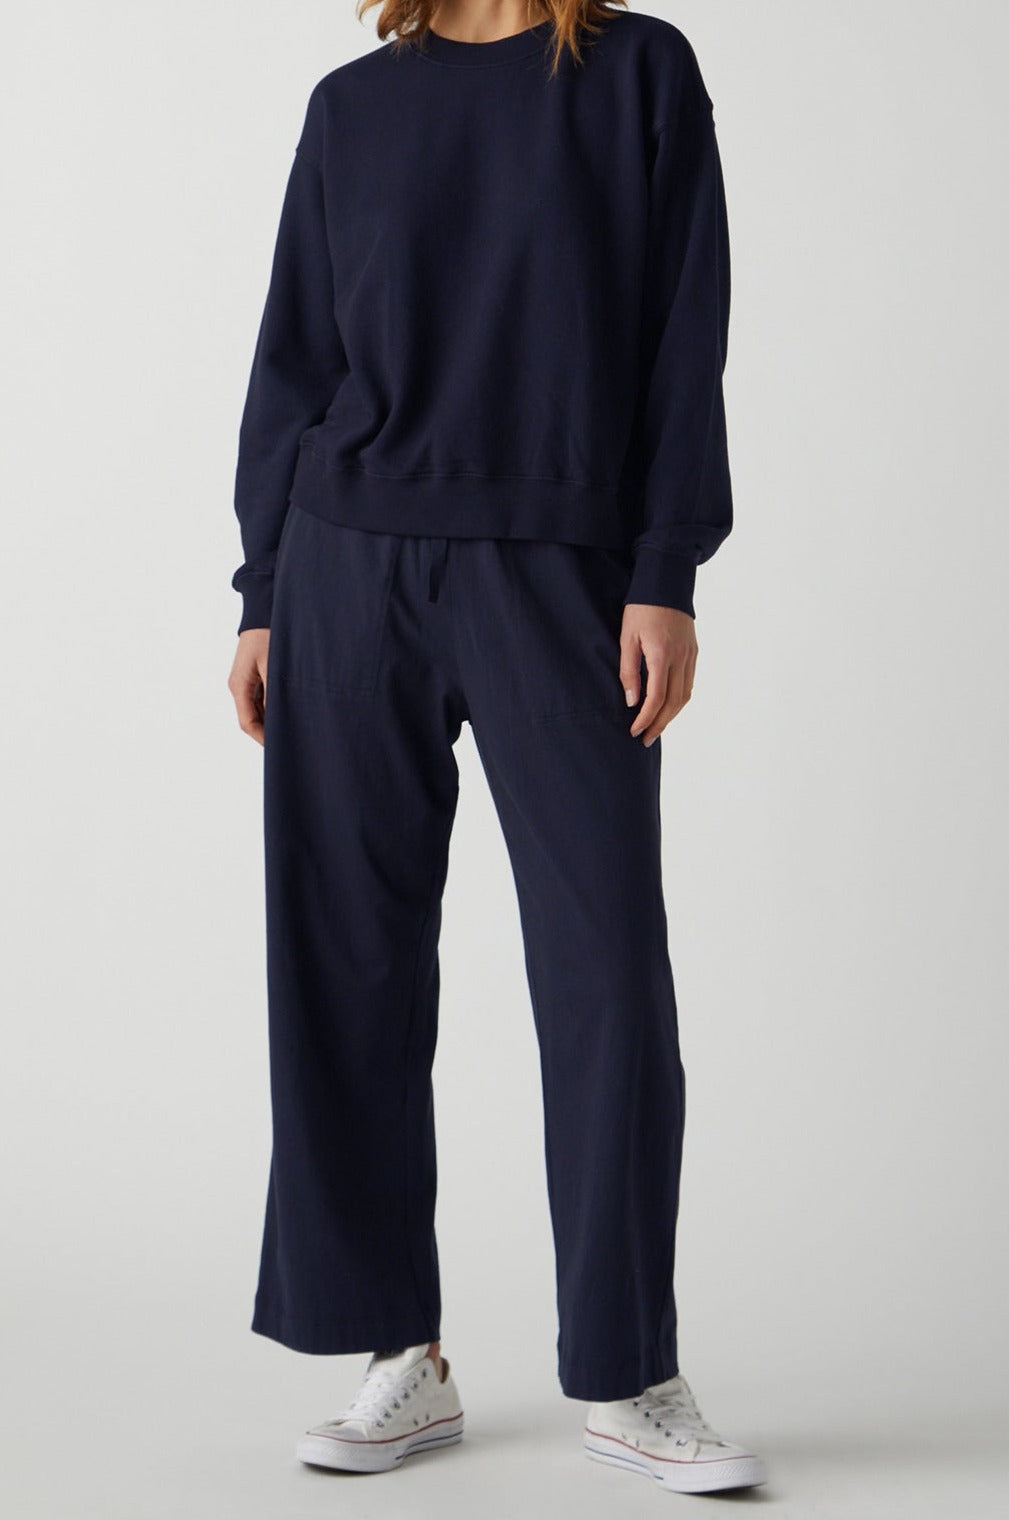 Ynez Sweatshirt in navy with Pismo Pant full length front-26007096361153